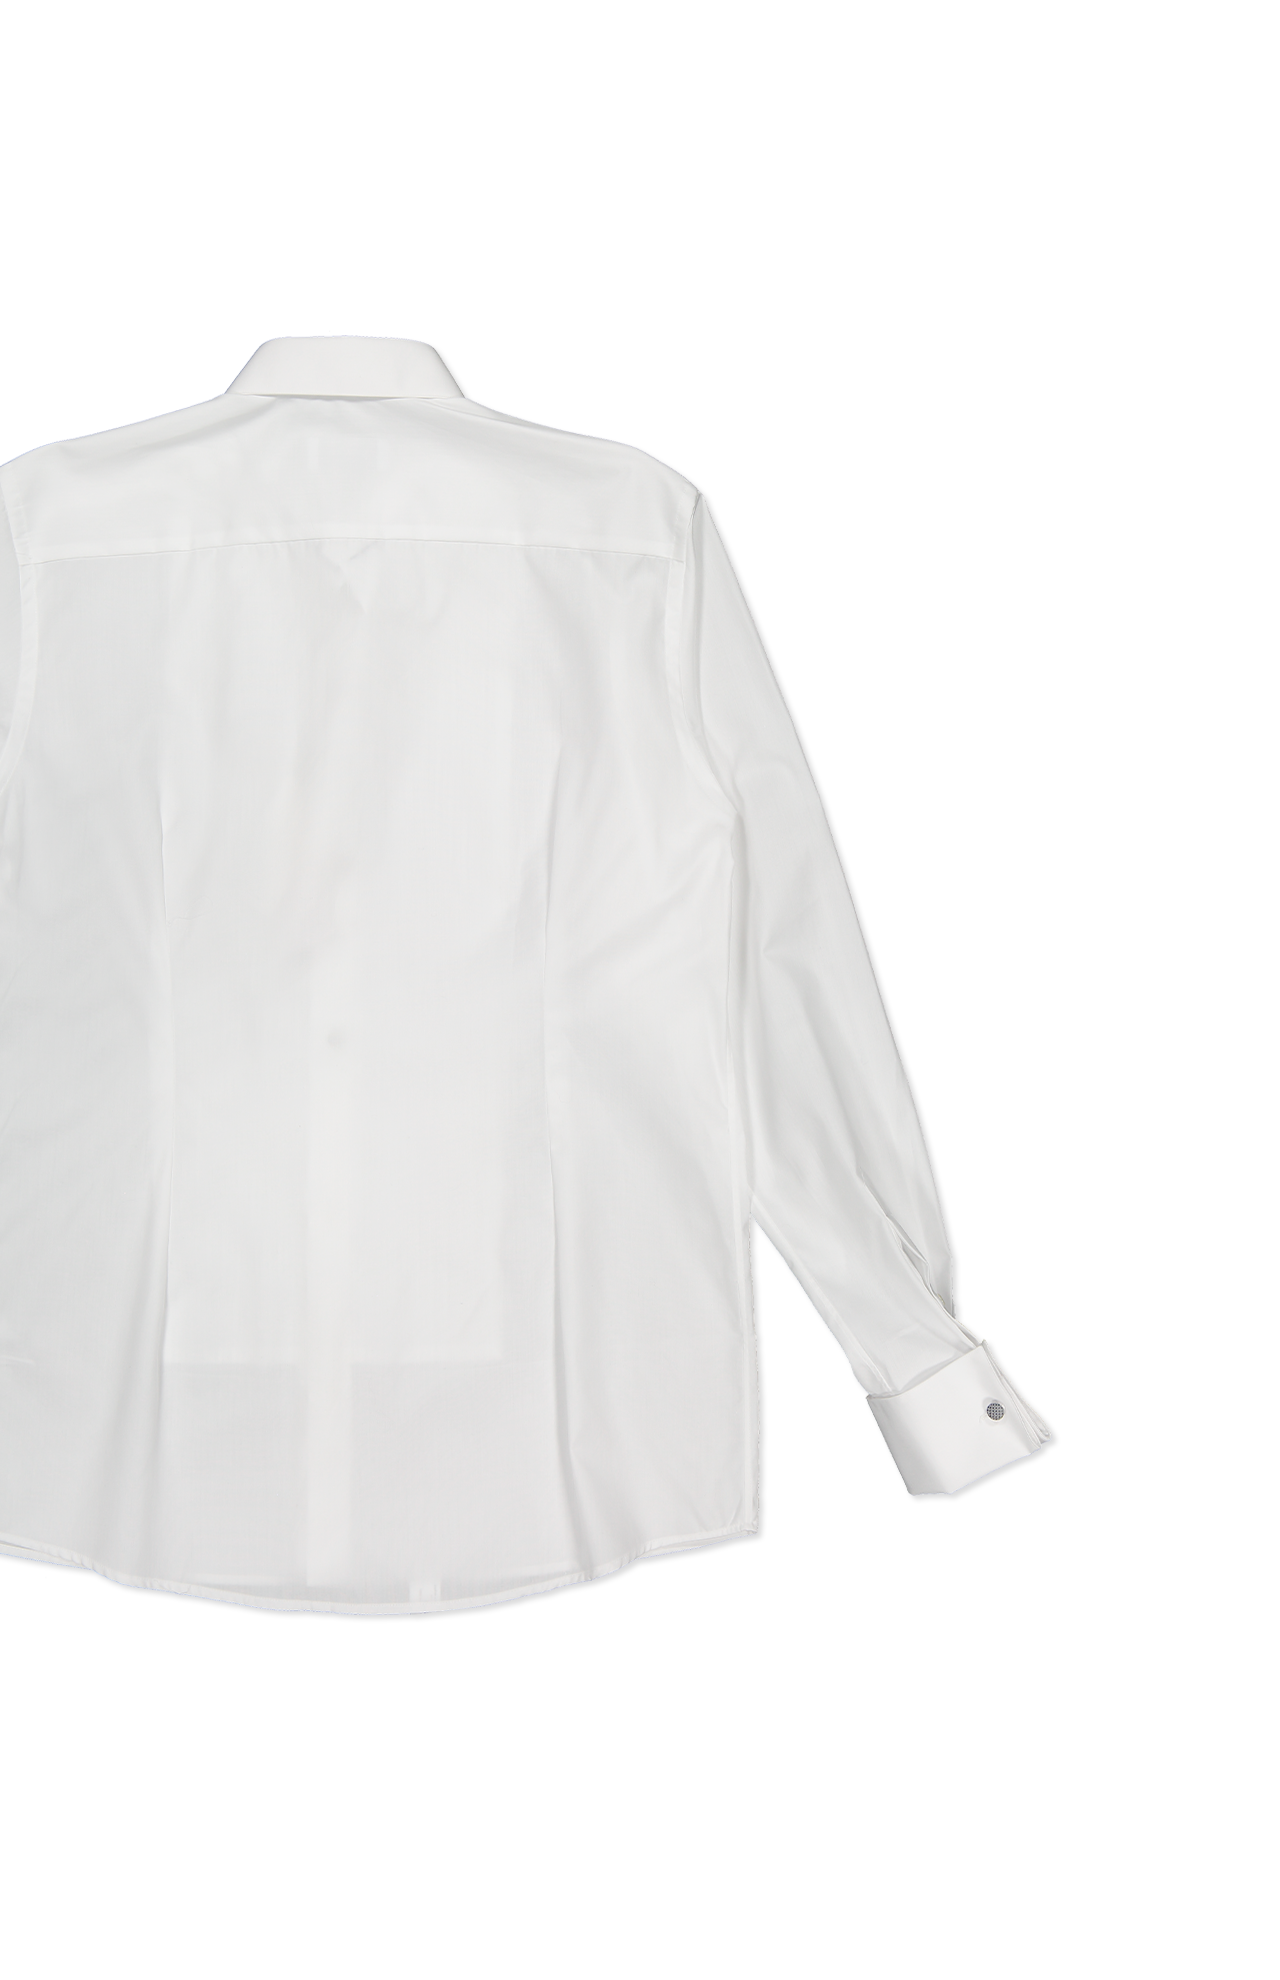 Eton Bibbed Tuxedo Shirt in White with Contrast Buttons - Back Detail Image (4441564741747)